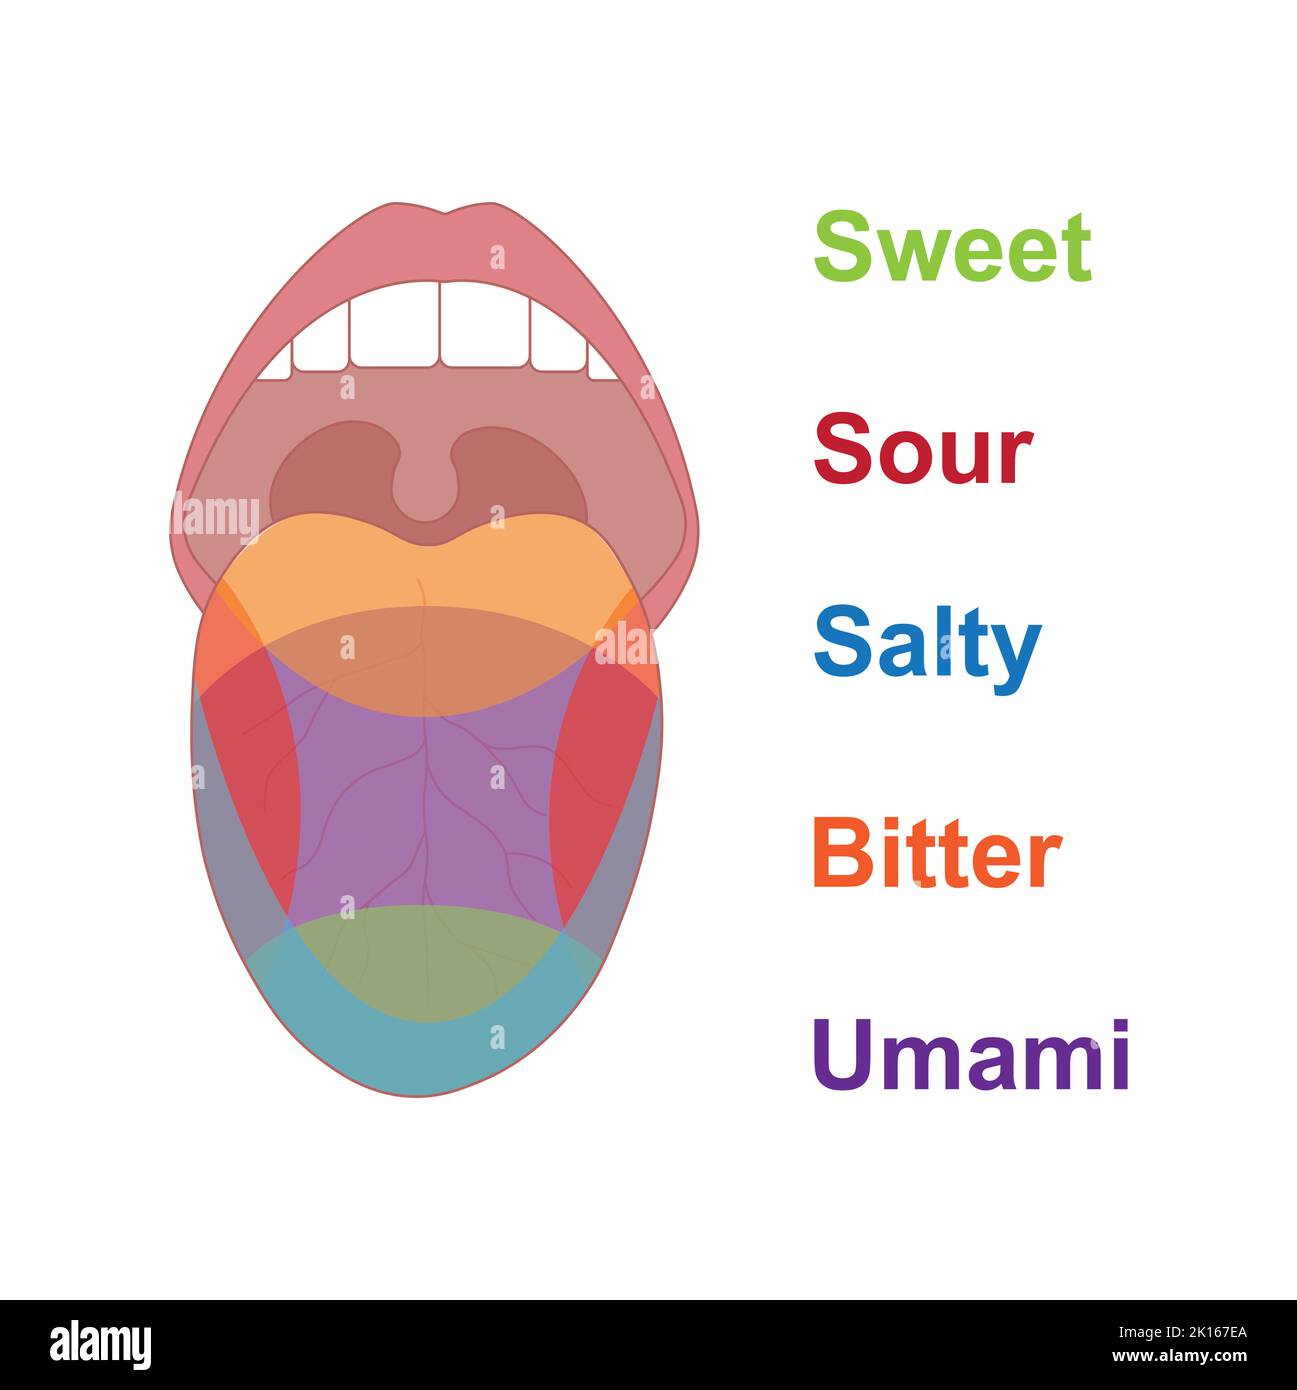 Scientific Designing Of The Human Tongue Taste Areas Sweet Sour